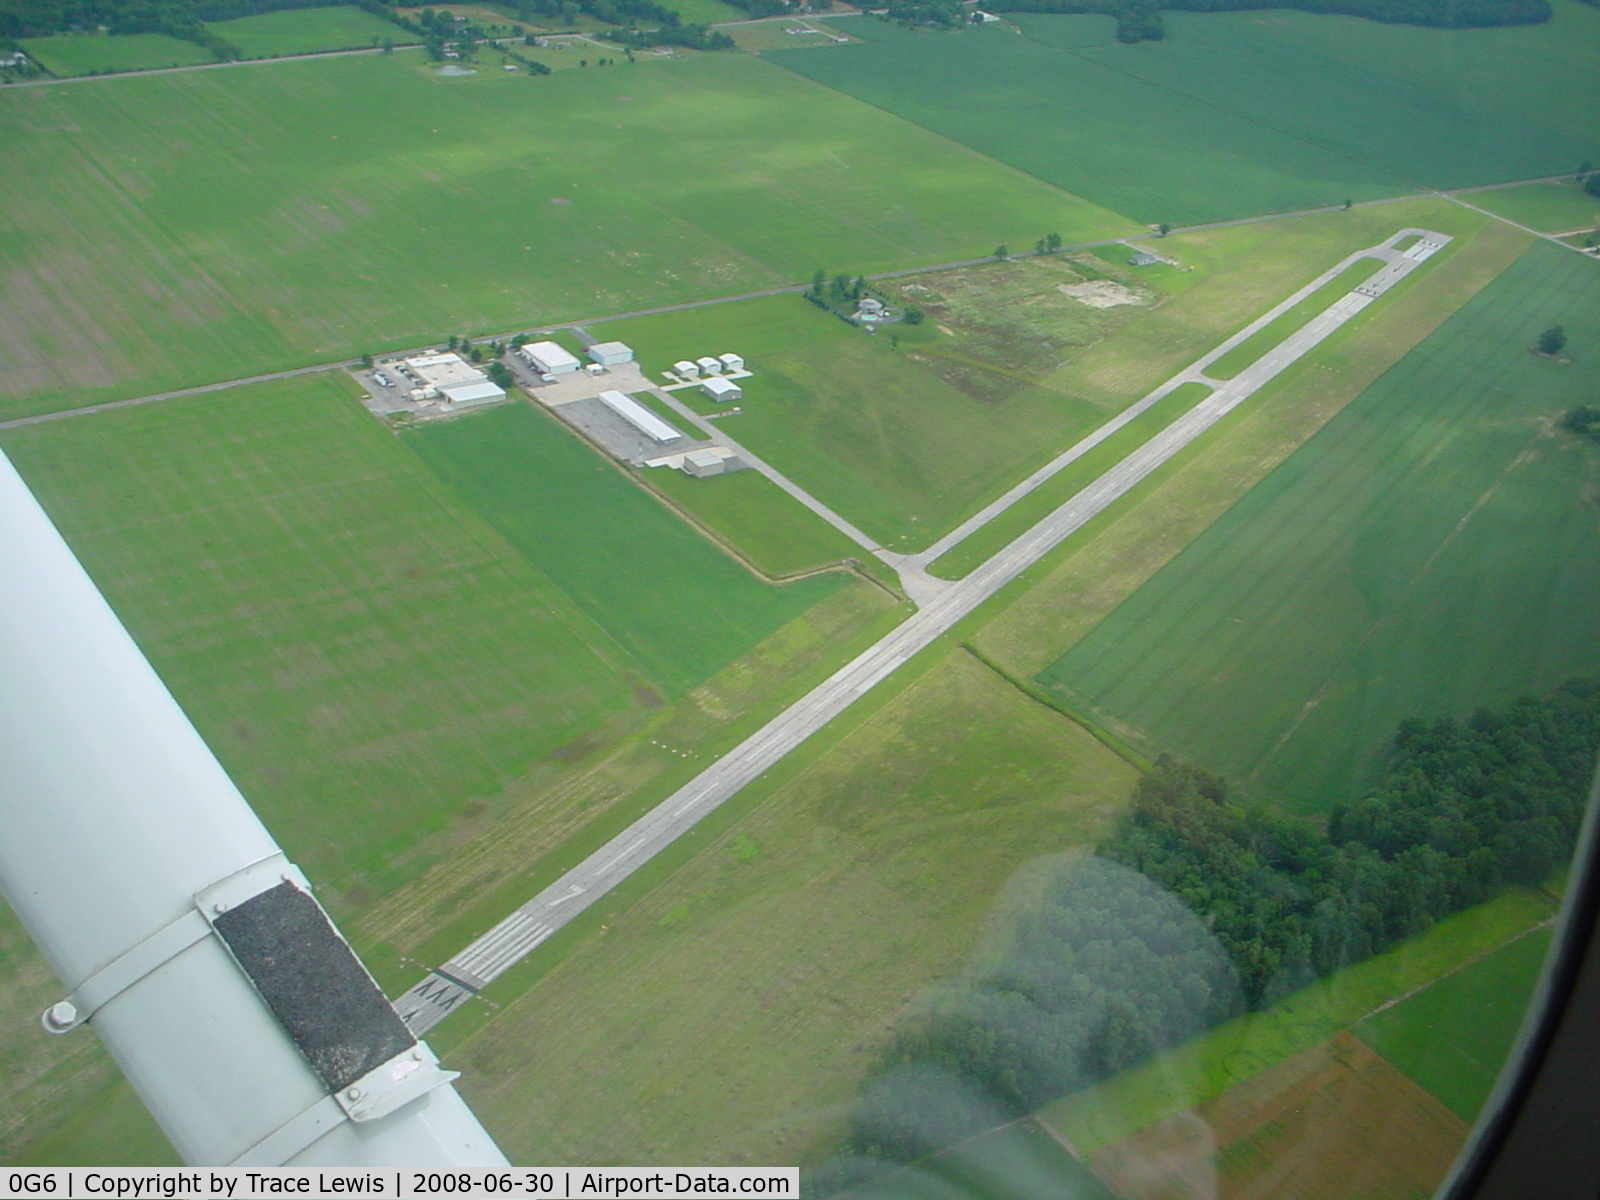 Williams County Airport (0G6) - Taken on the way to SKY